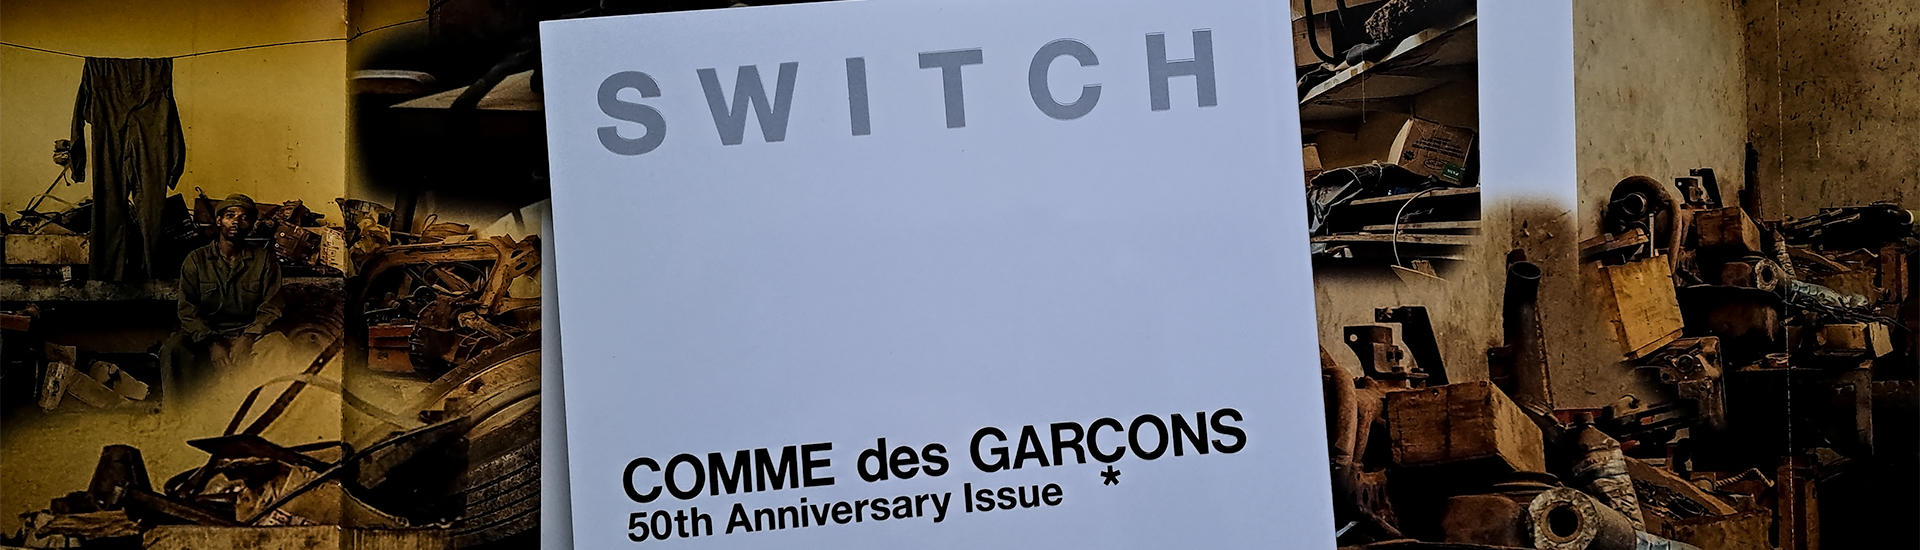 SWITCH special edition COMME des GARCONS 50th Anniversary Issue